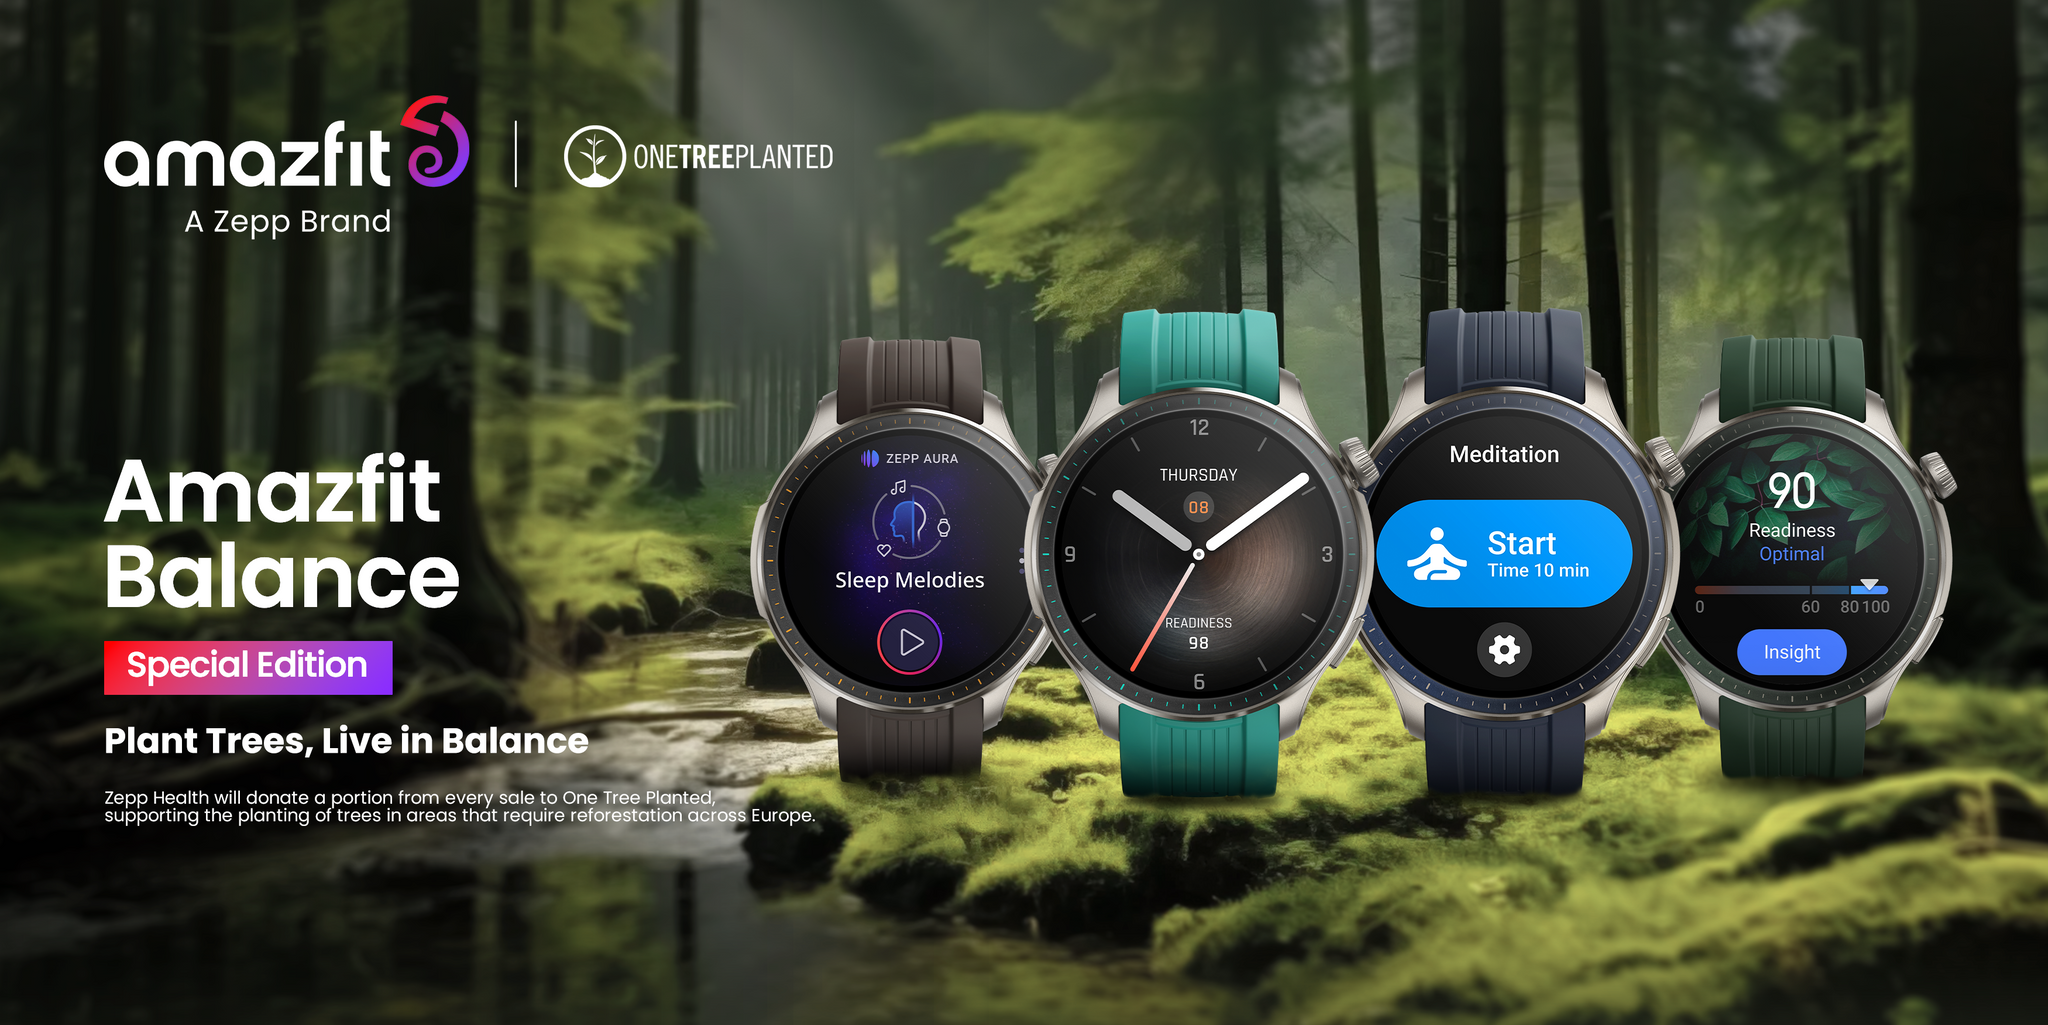 AMAZFIT LAUNCHES NEW SPECIAL EDITIONS OF AMAZFIT BALANCE, AND PARTNERS –  Amazfit